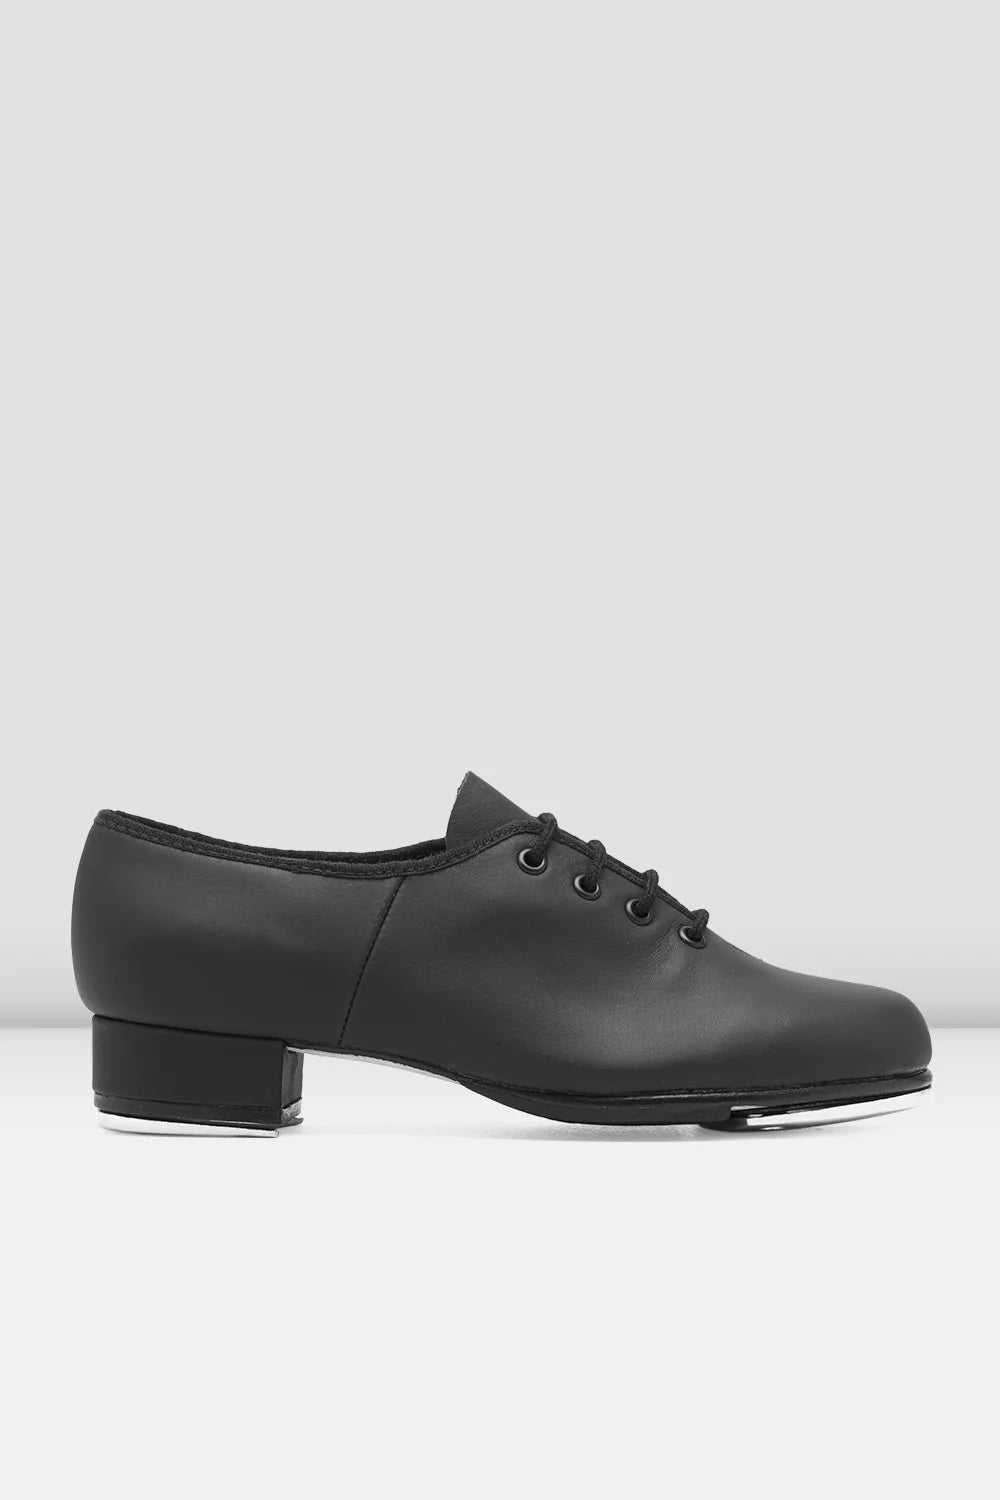 Bloch S0301M Mens Jazz Tap Leather Tap Shoes - SPECIAL ORDER